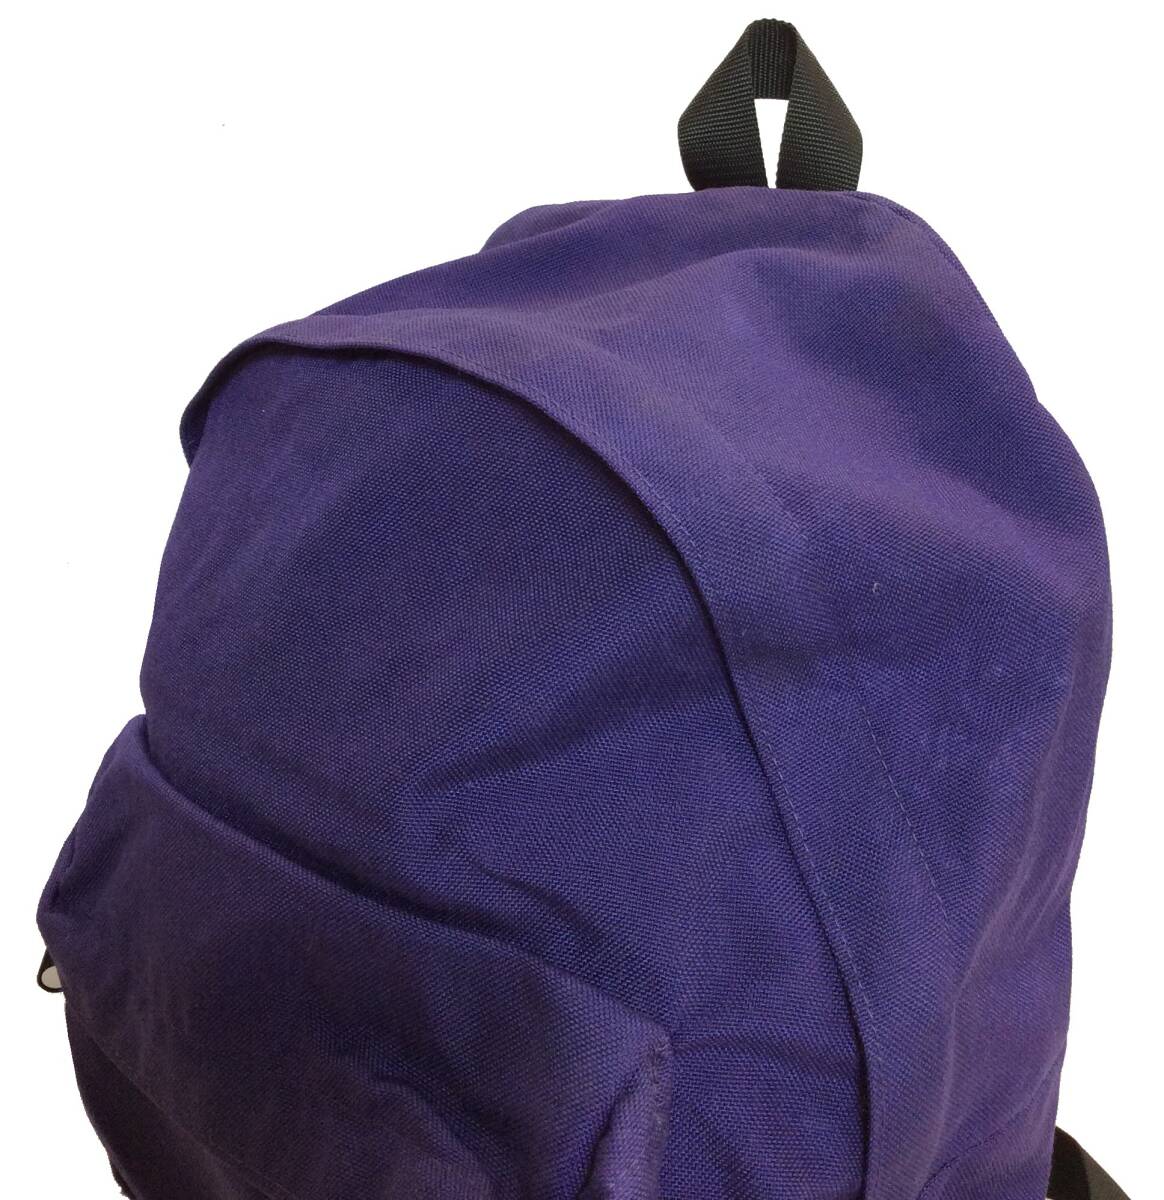  Herve Chapelier Herve Chapelier LIMITED USA made nylon leather rucksack backpack bag purple / Brown 